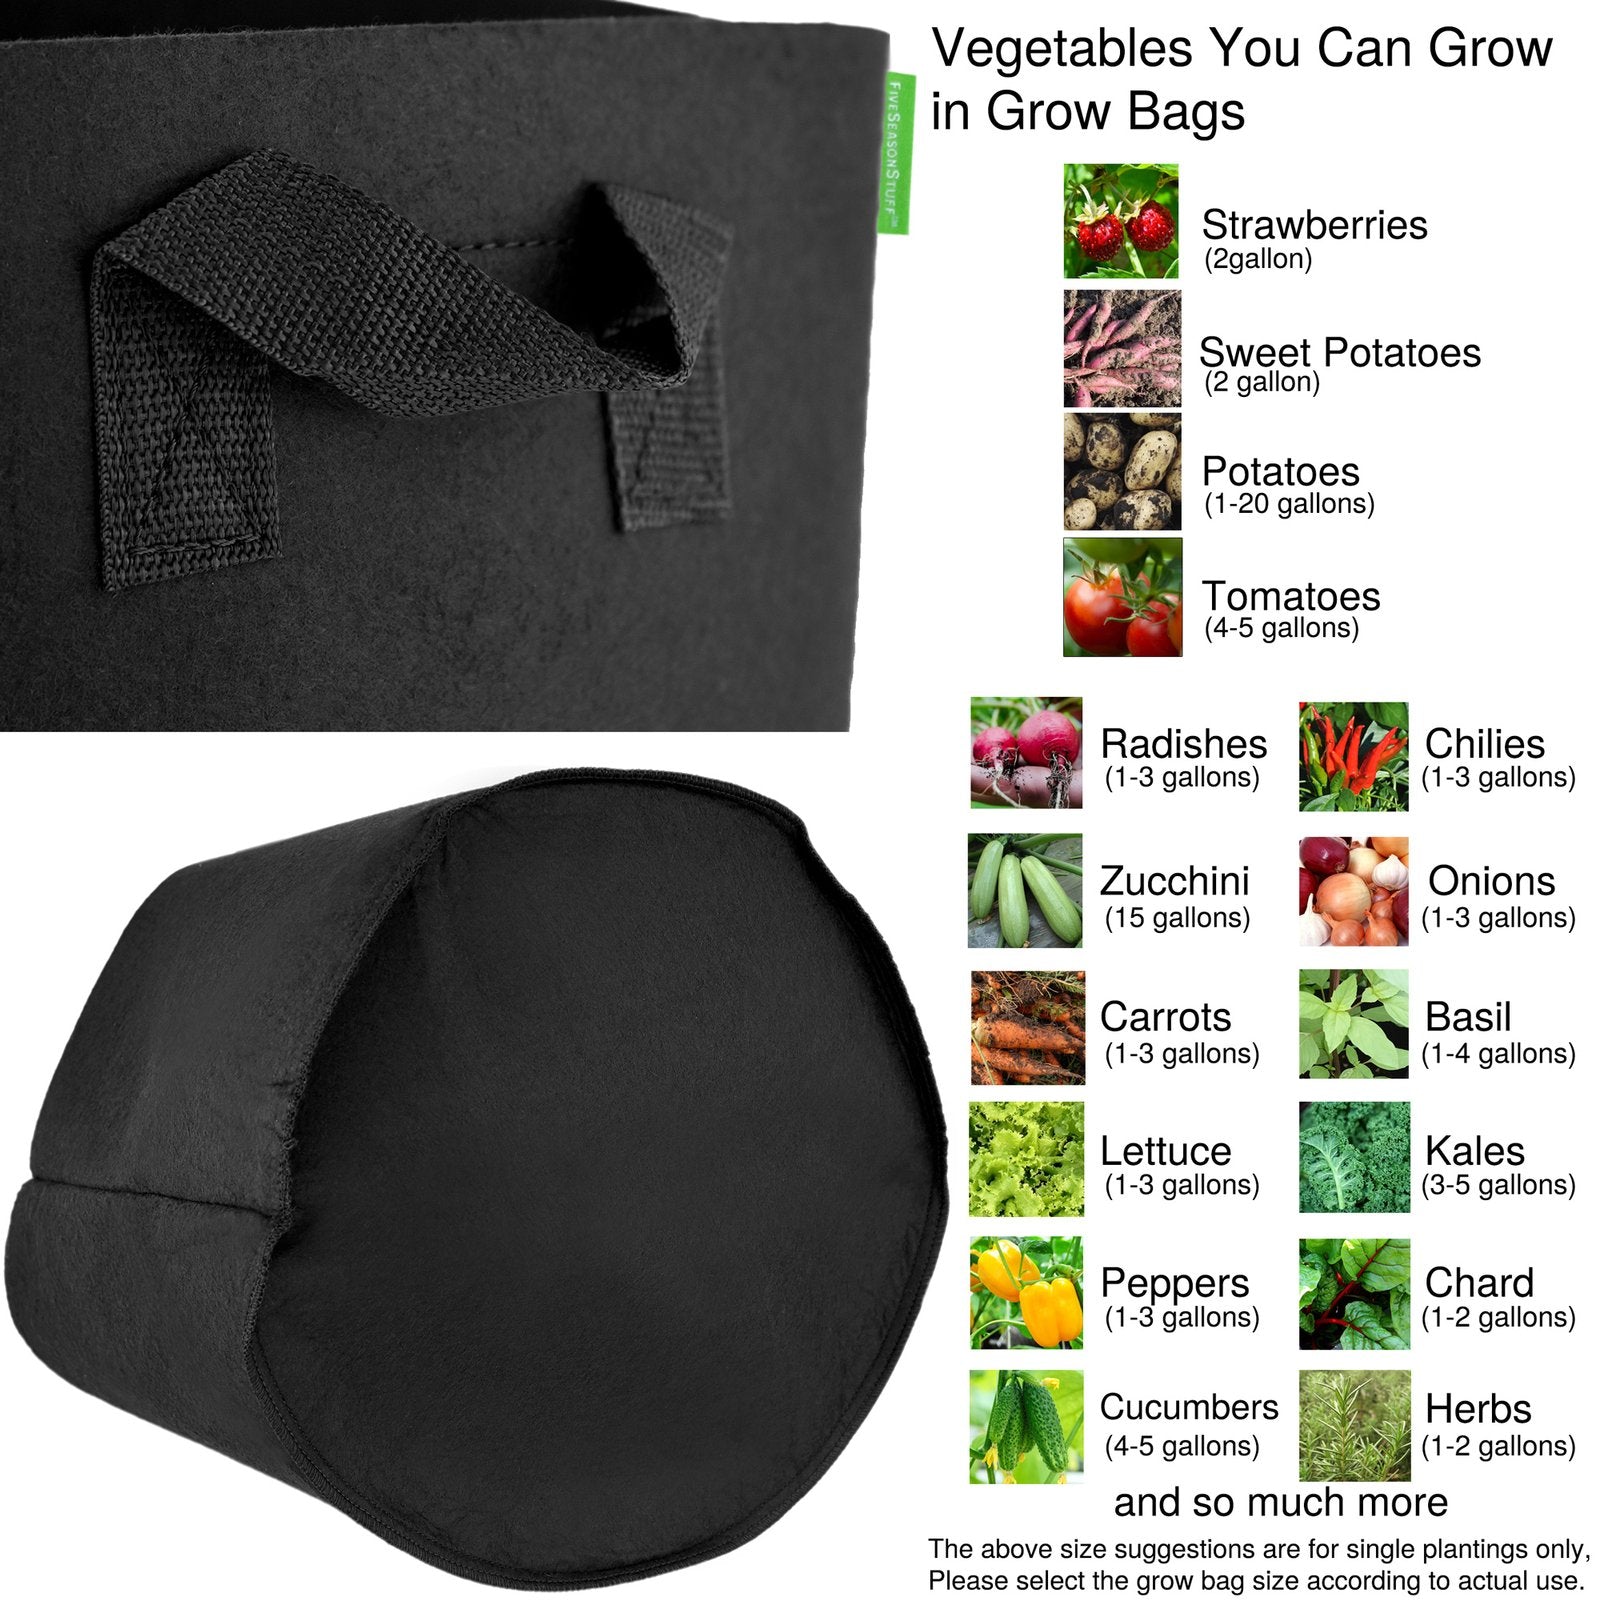 15 Pack 1 Gallons Grow Bags - Breathable Fabric Pots for Healthier Plants Vegetables Flowers – Heavy Duty Thick Containers with Sturdy Handles - Aeration Planters for Smart Gardening (Black)